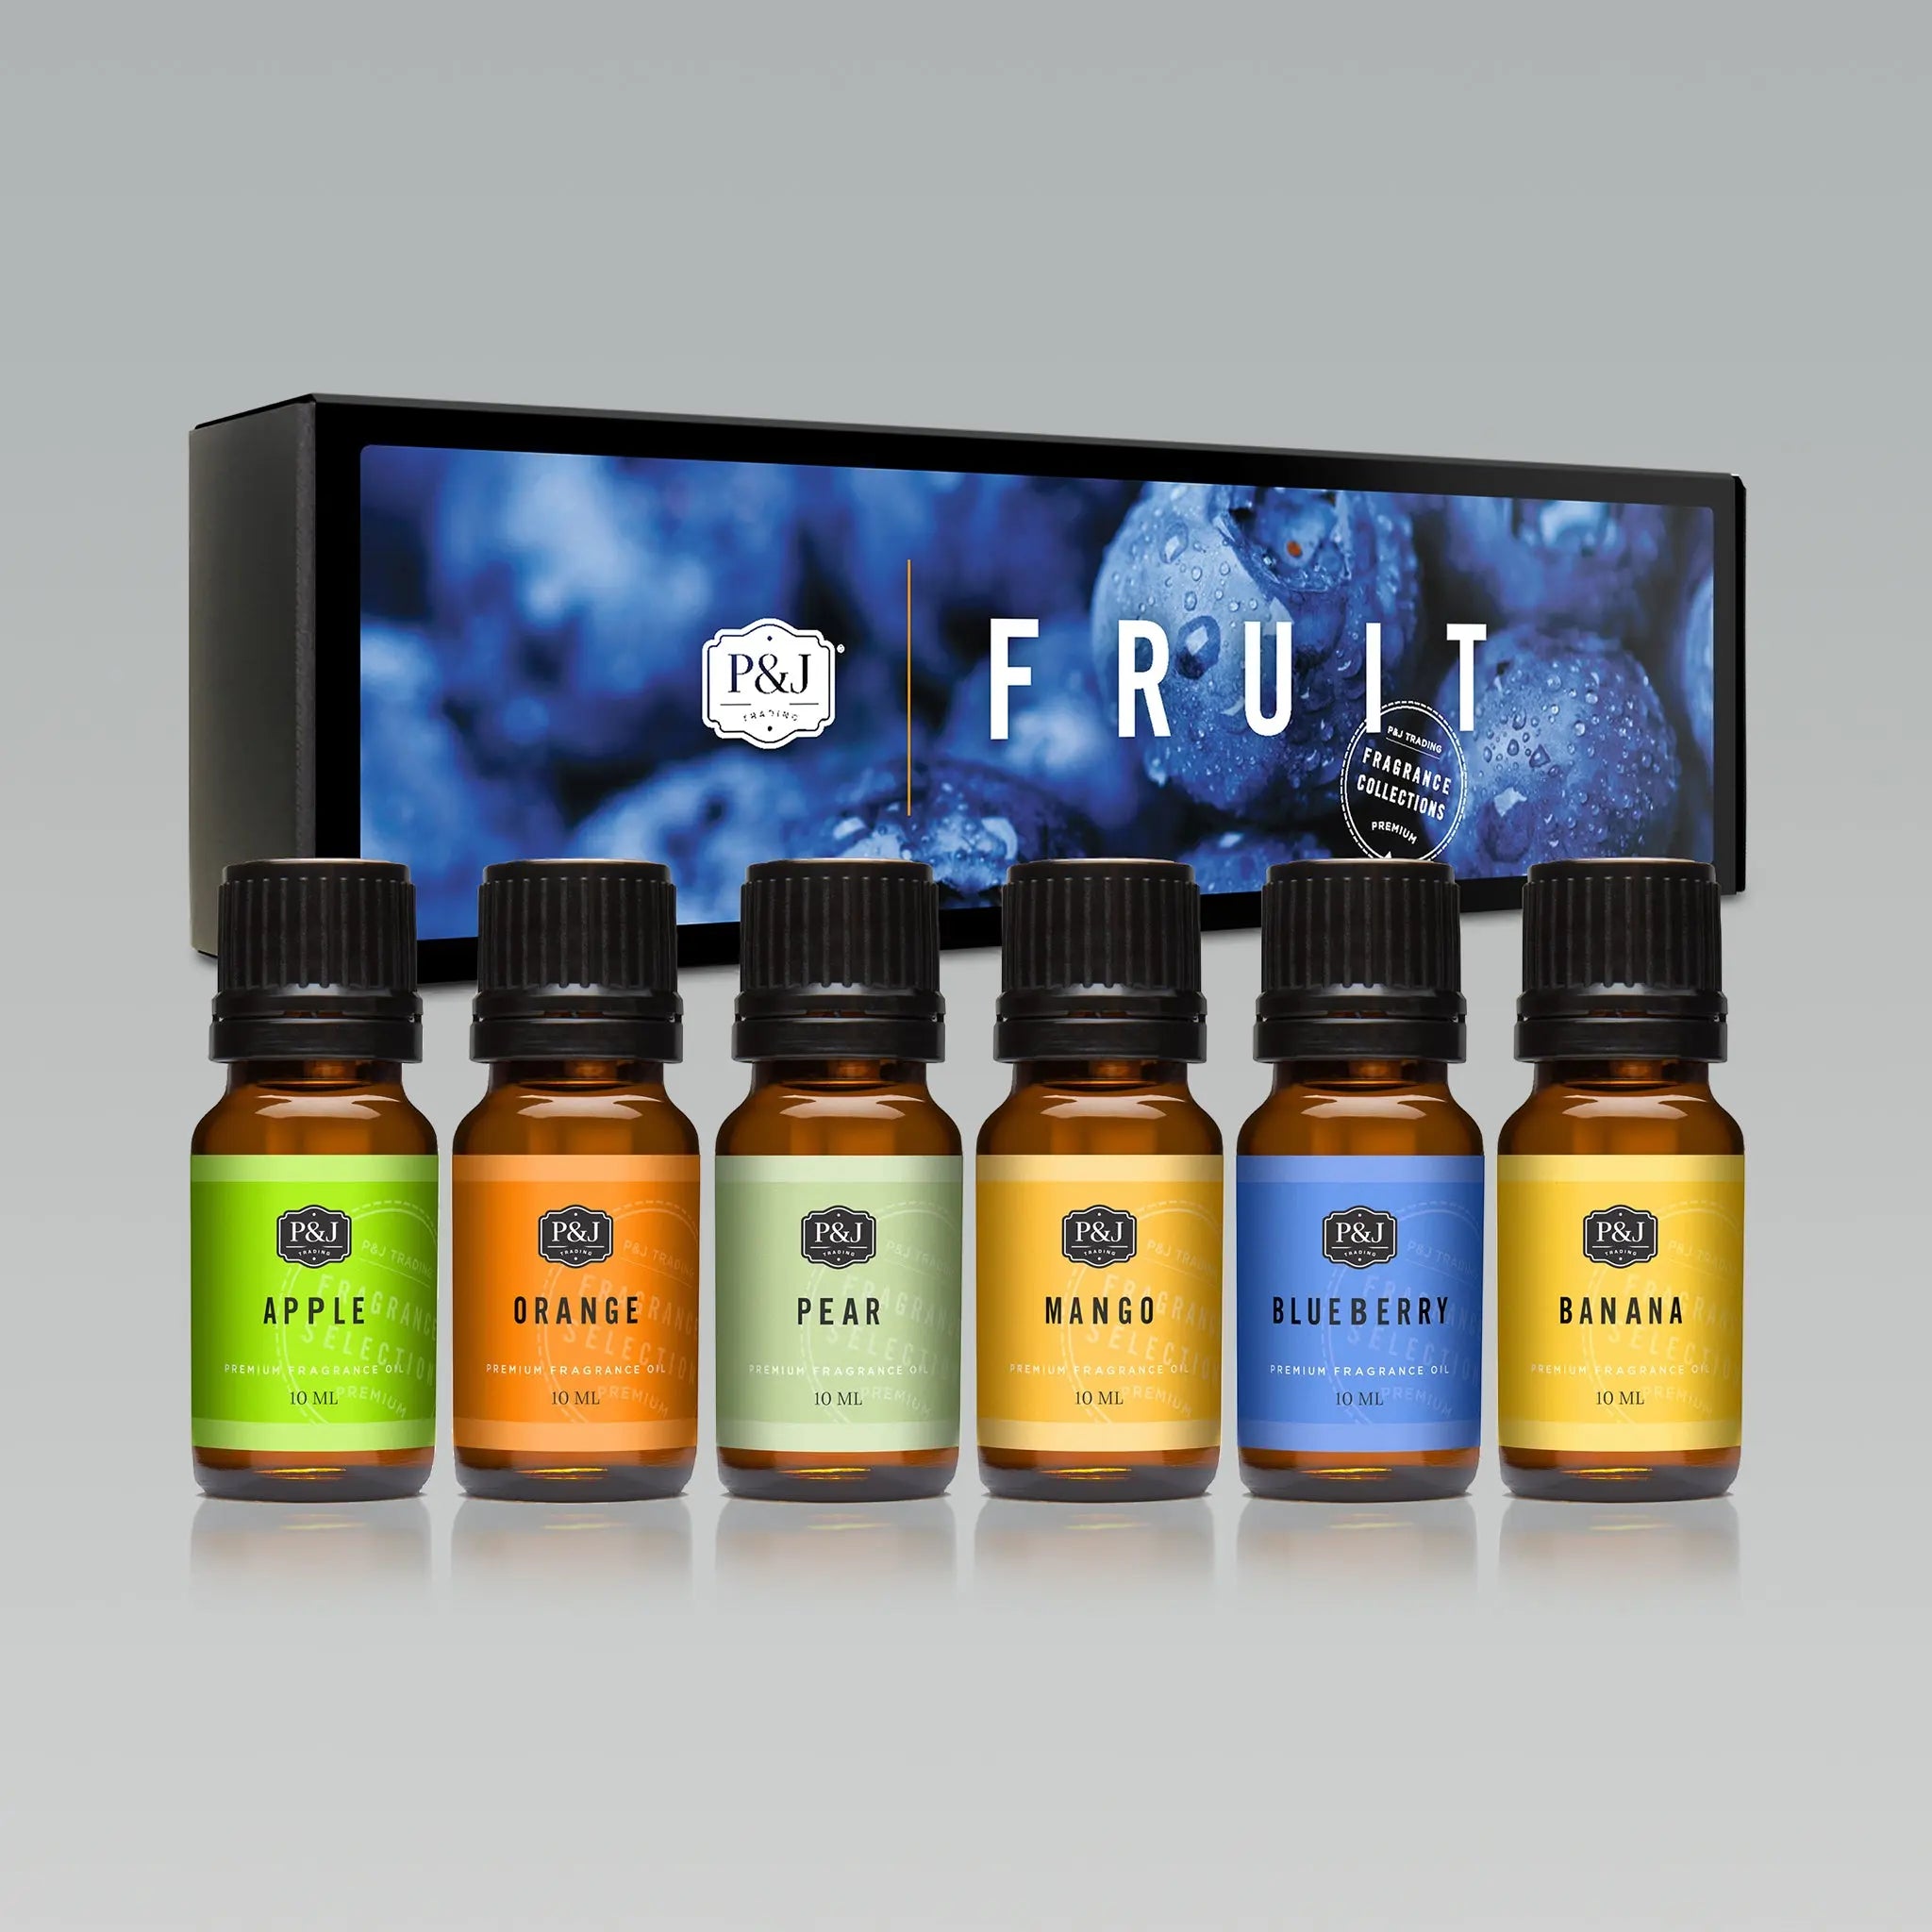 P&j Trading Fragrance Oil | Citrus Set of 6 - Scented Oil for Soap Making, Diffusers, Candle Making, Lotions, Haircare, Slime, and Home Fragrance